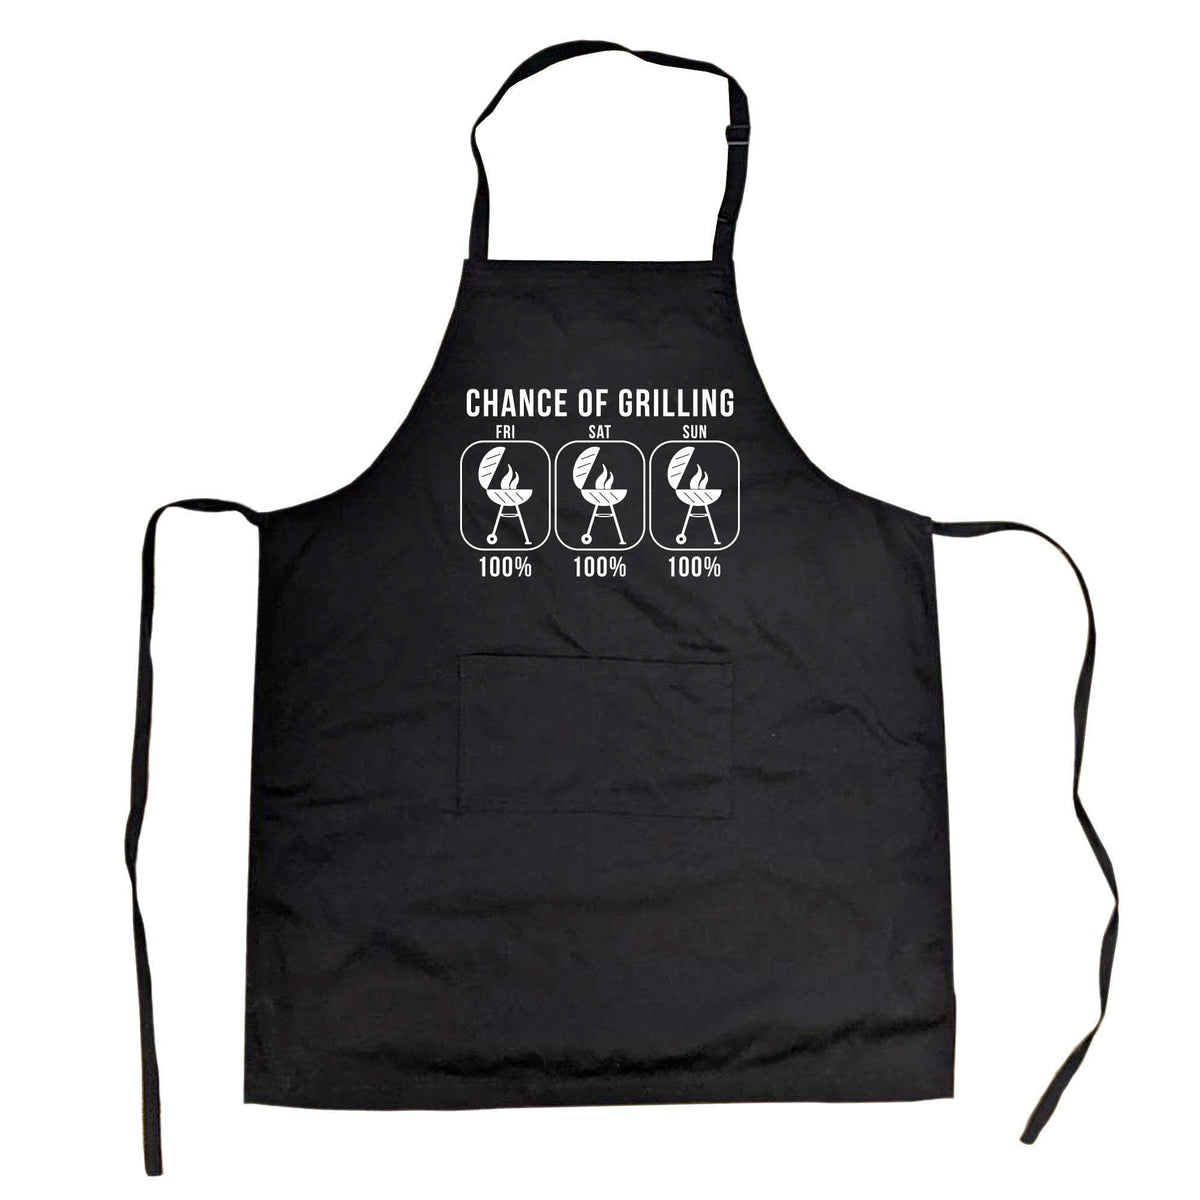 100% Chance Of Grilling Cookout Apron - Crazy Dog T-Shirts